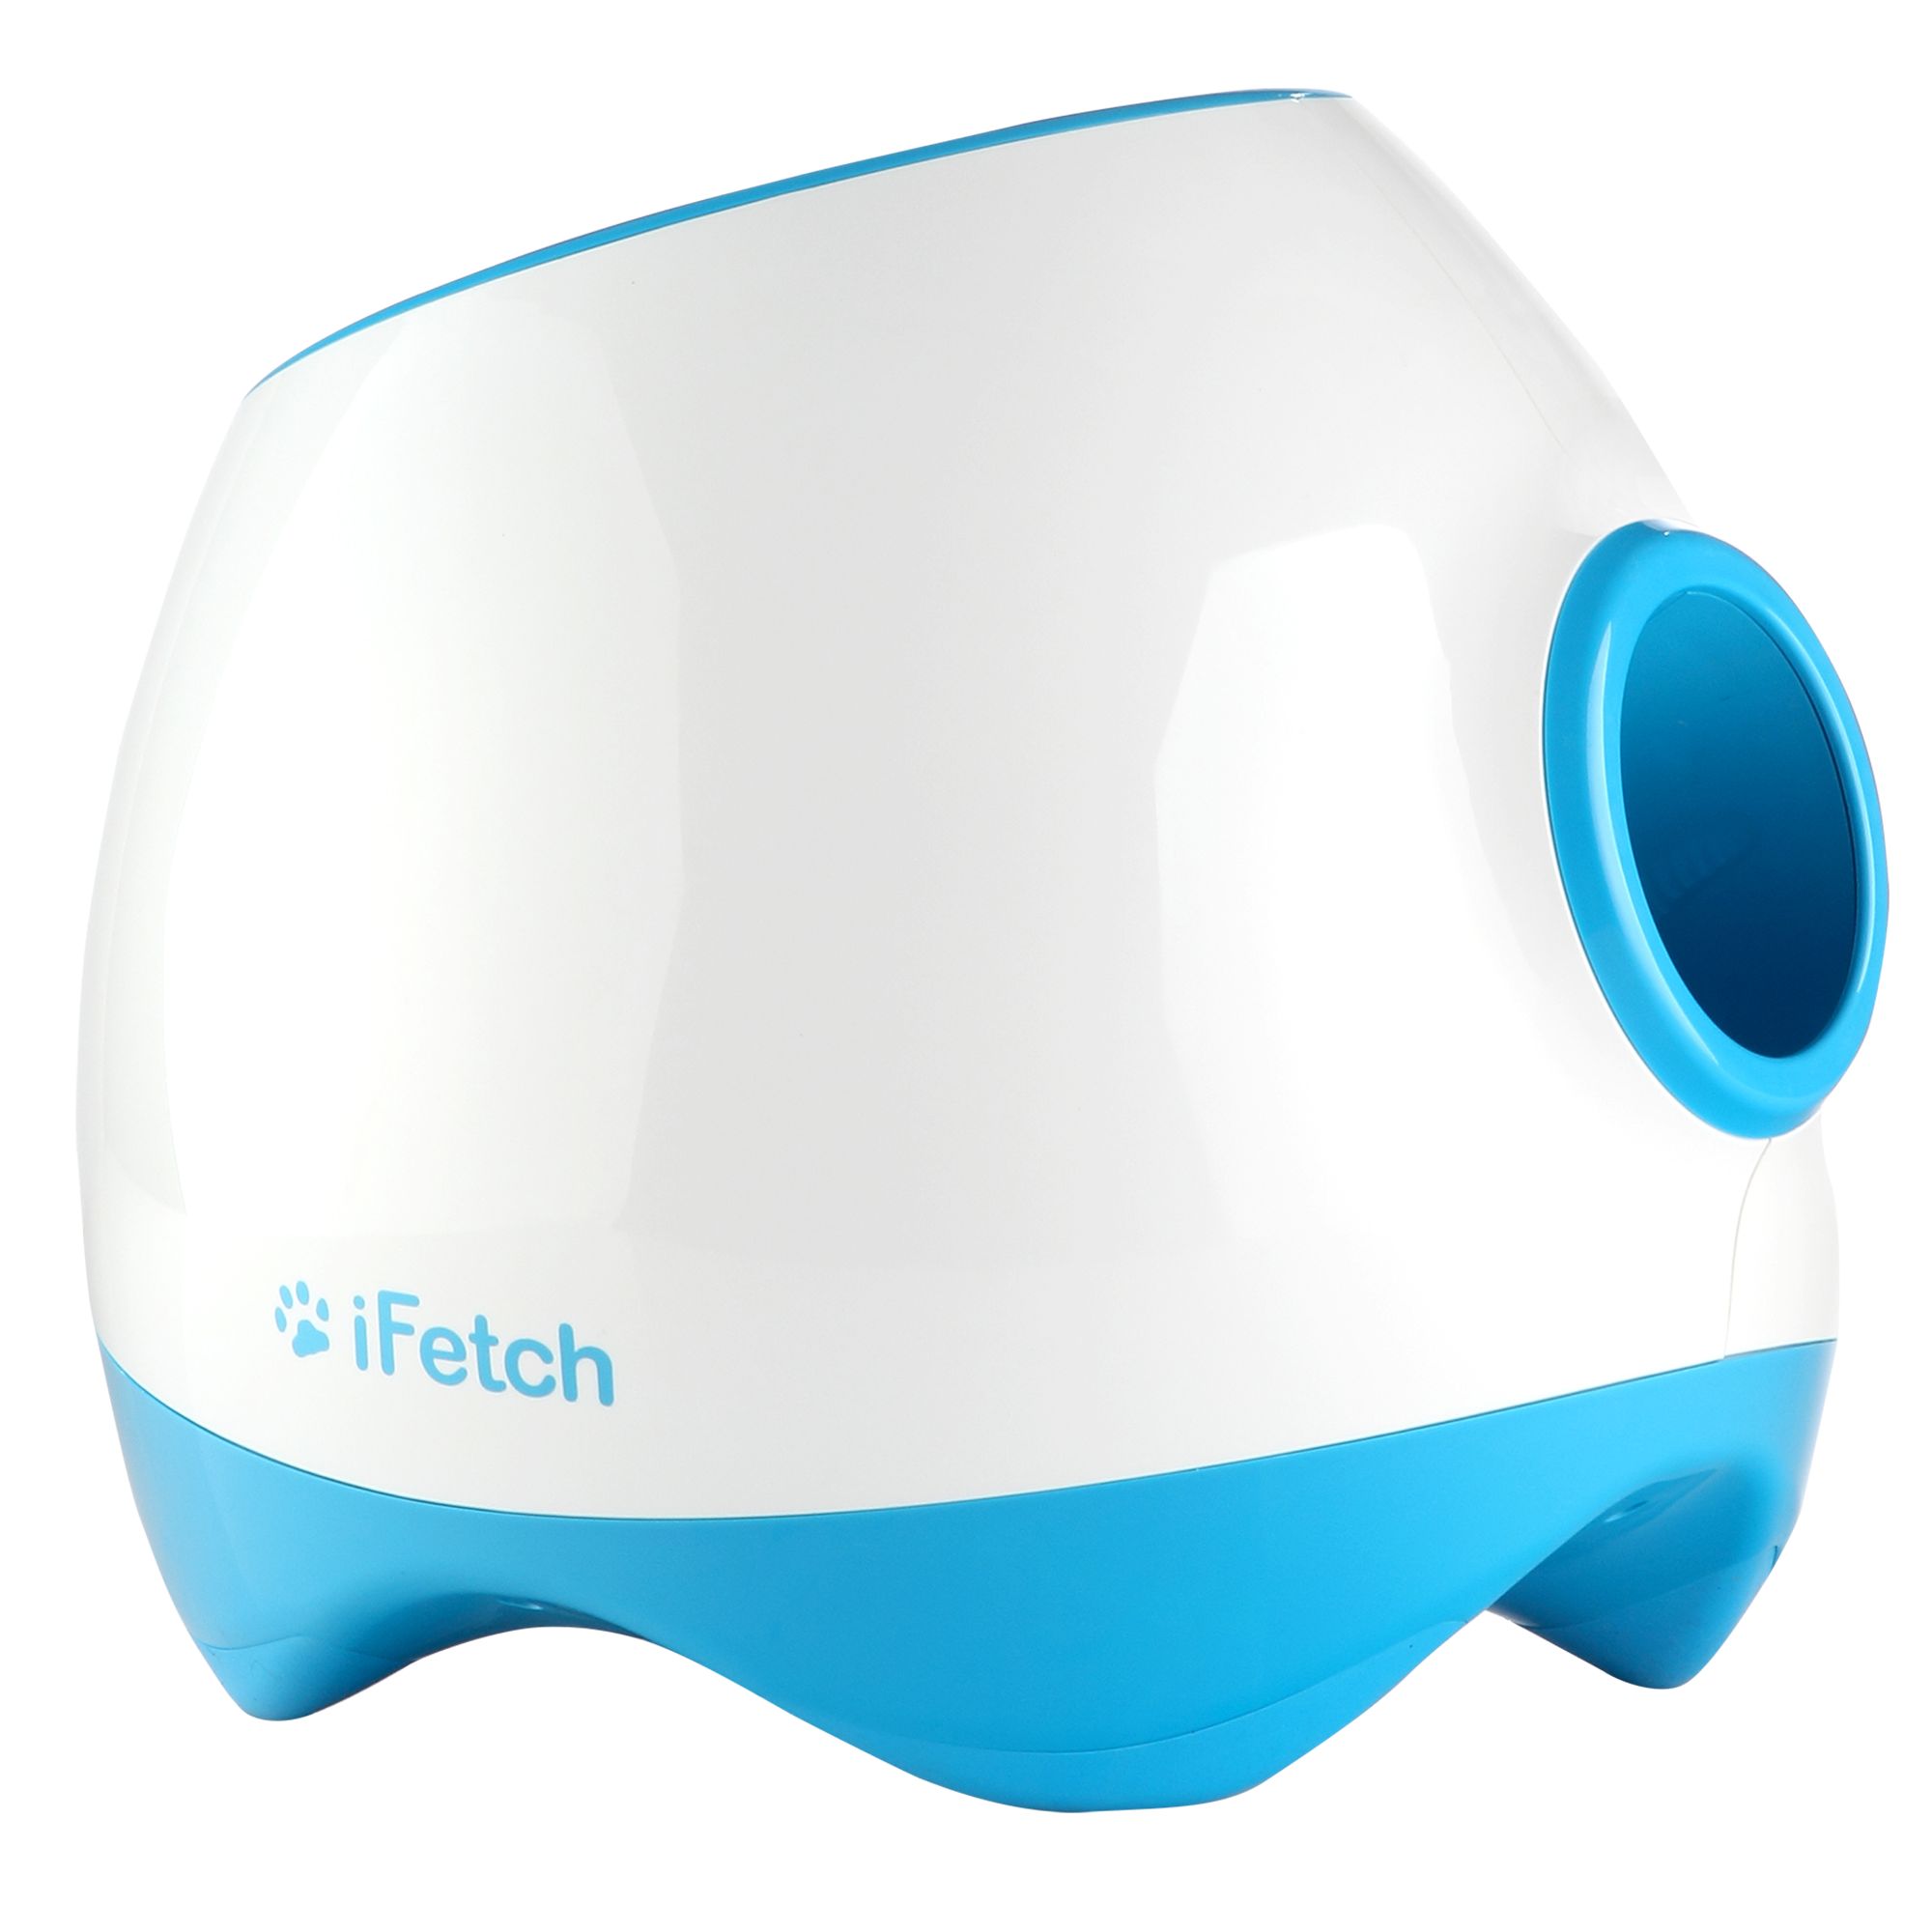 ifetch too ball launcher